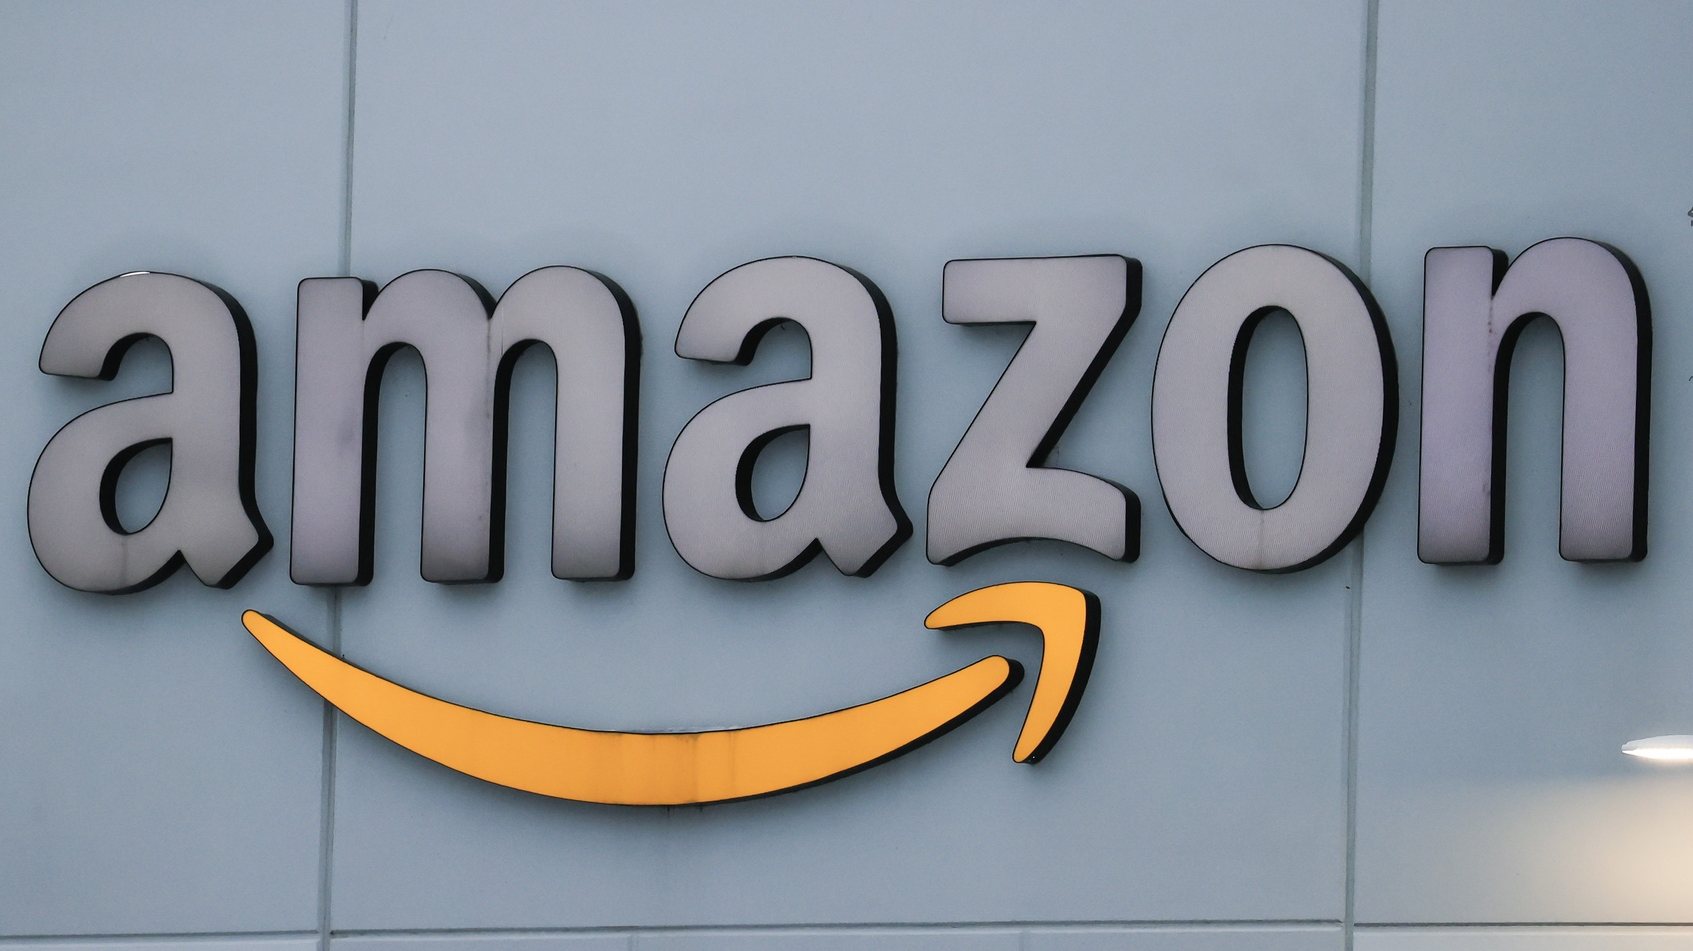 epa09193398 (FILE) An Amazon warehouse is outfitted with the Amazon logo in Waukegan, Illinois, USA, 02 February 2021 (reissued 12 May 2021). The EU Court in Luxembourg on 12 May 2021 annulled an order by the European Union demanding Amazon to pay about 250 million euros in taxes.  EPA/TANNEN MAURY